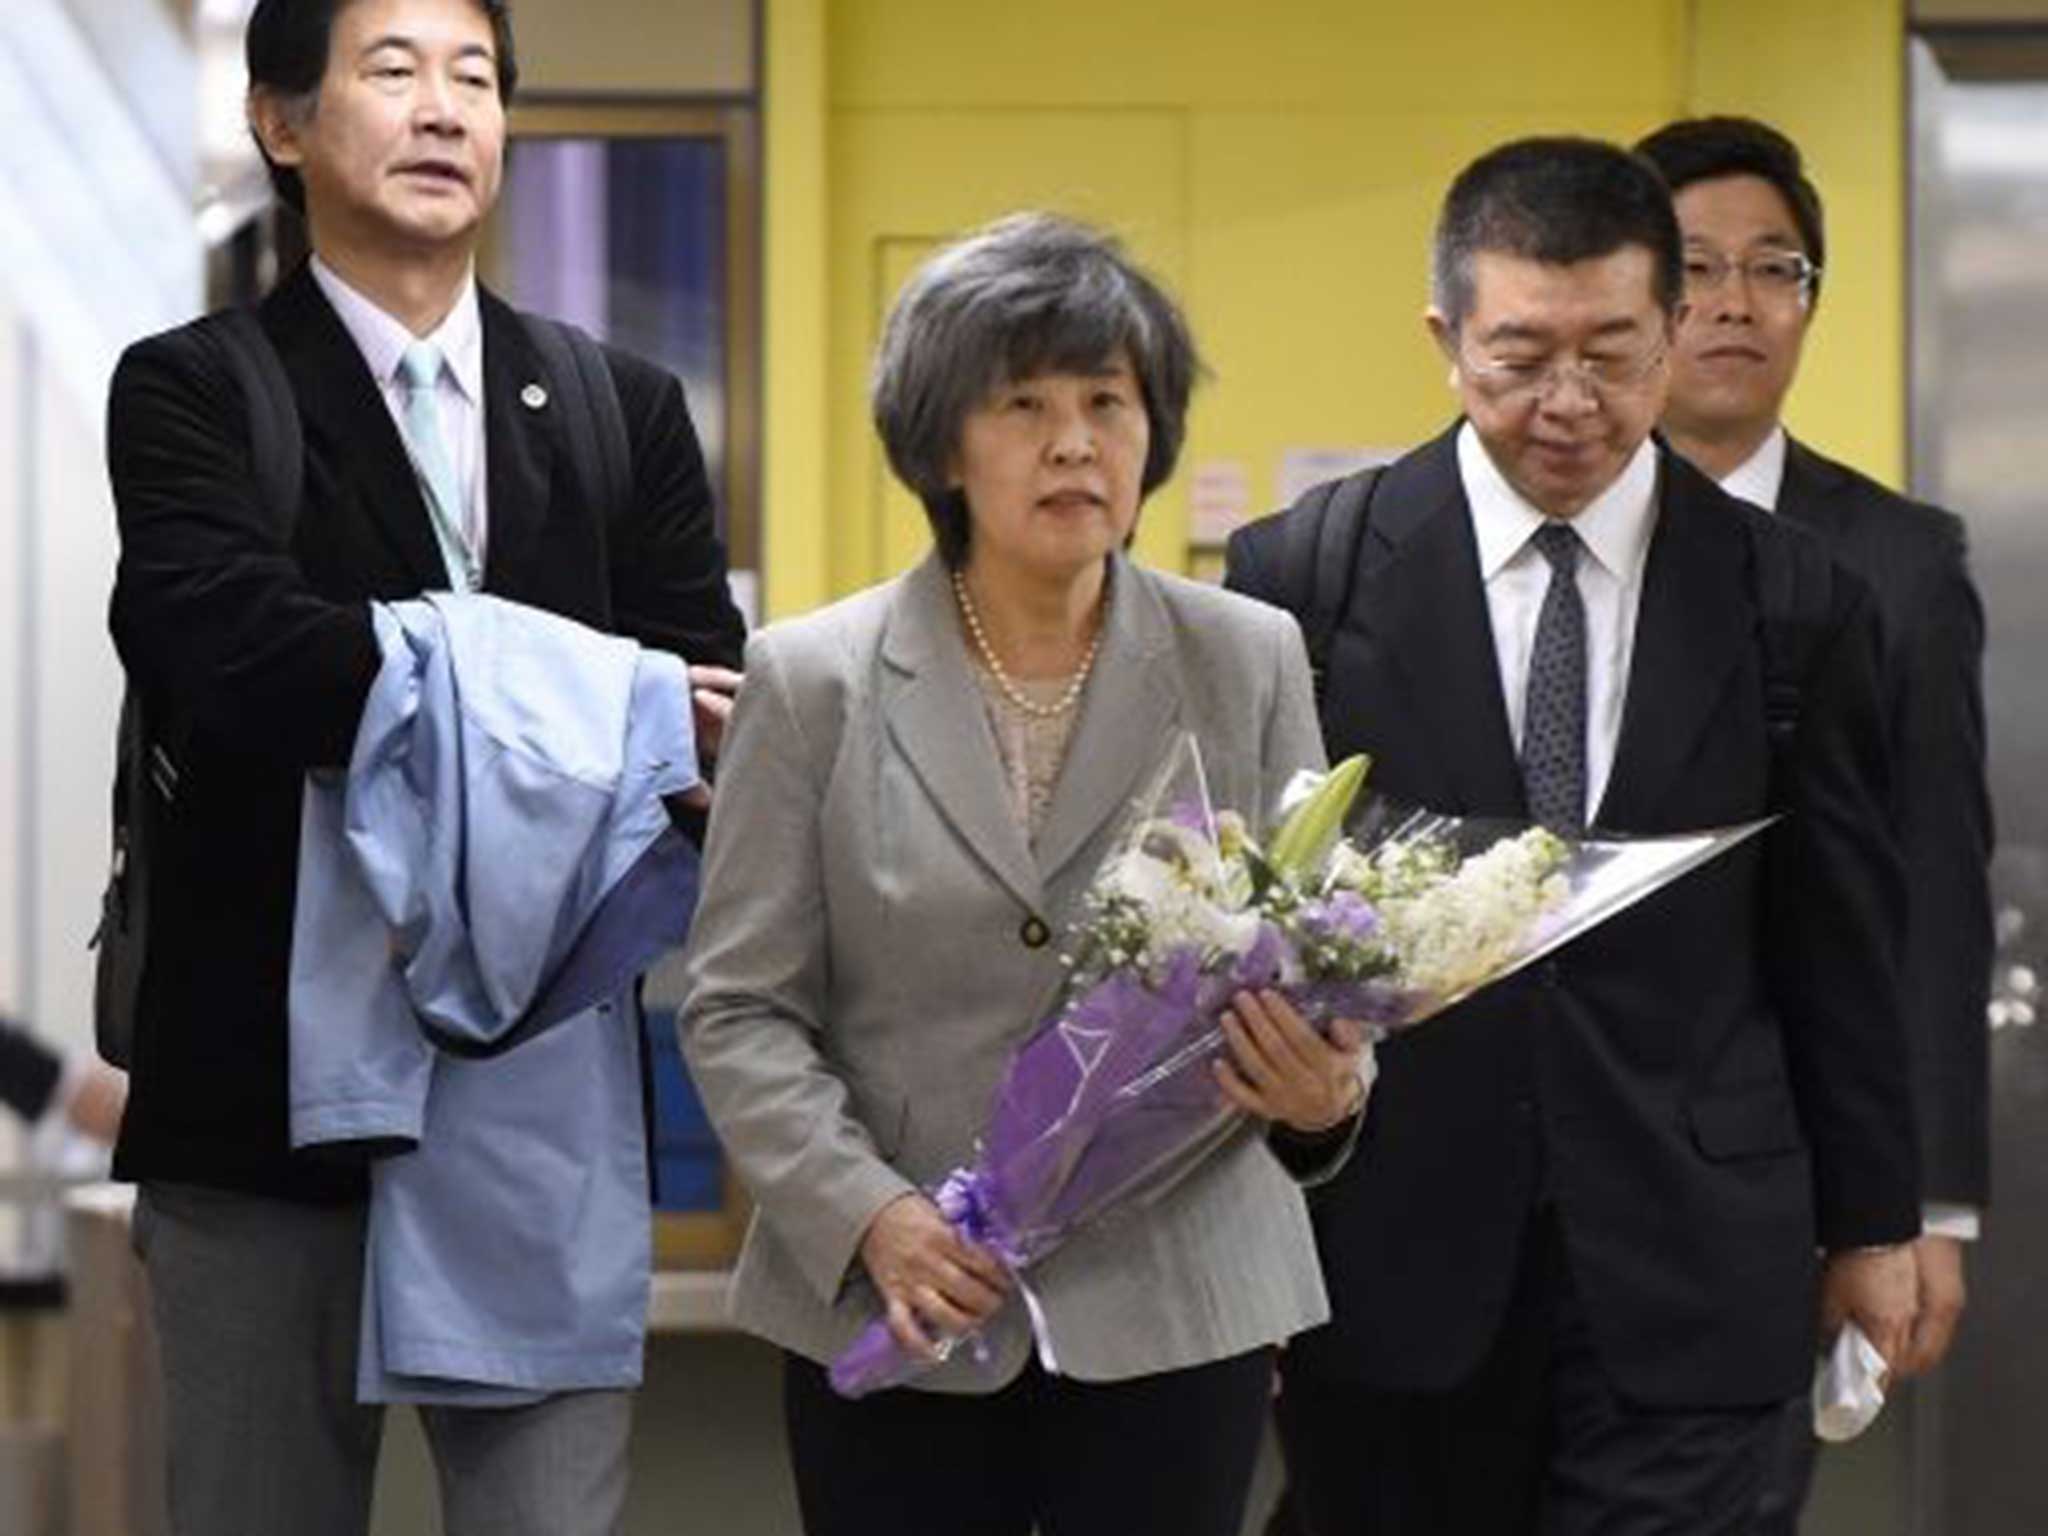 Shizue Takahashi, widow of a subway officer who was killed, arrives to lay flowers